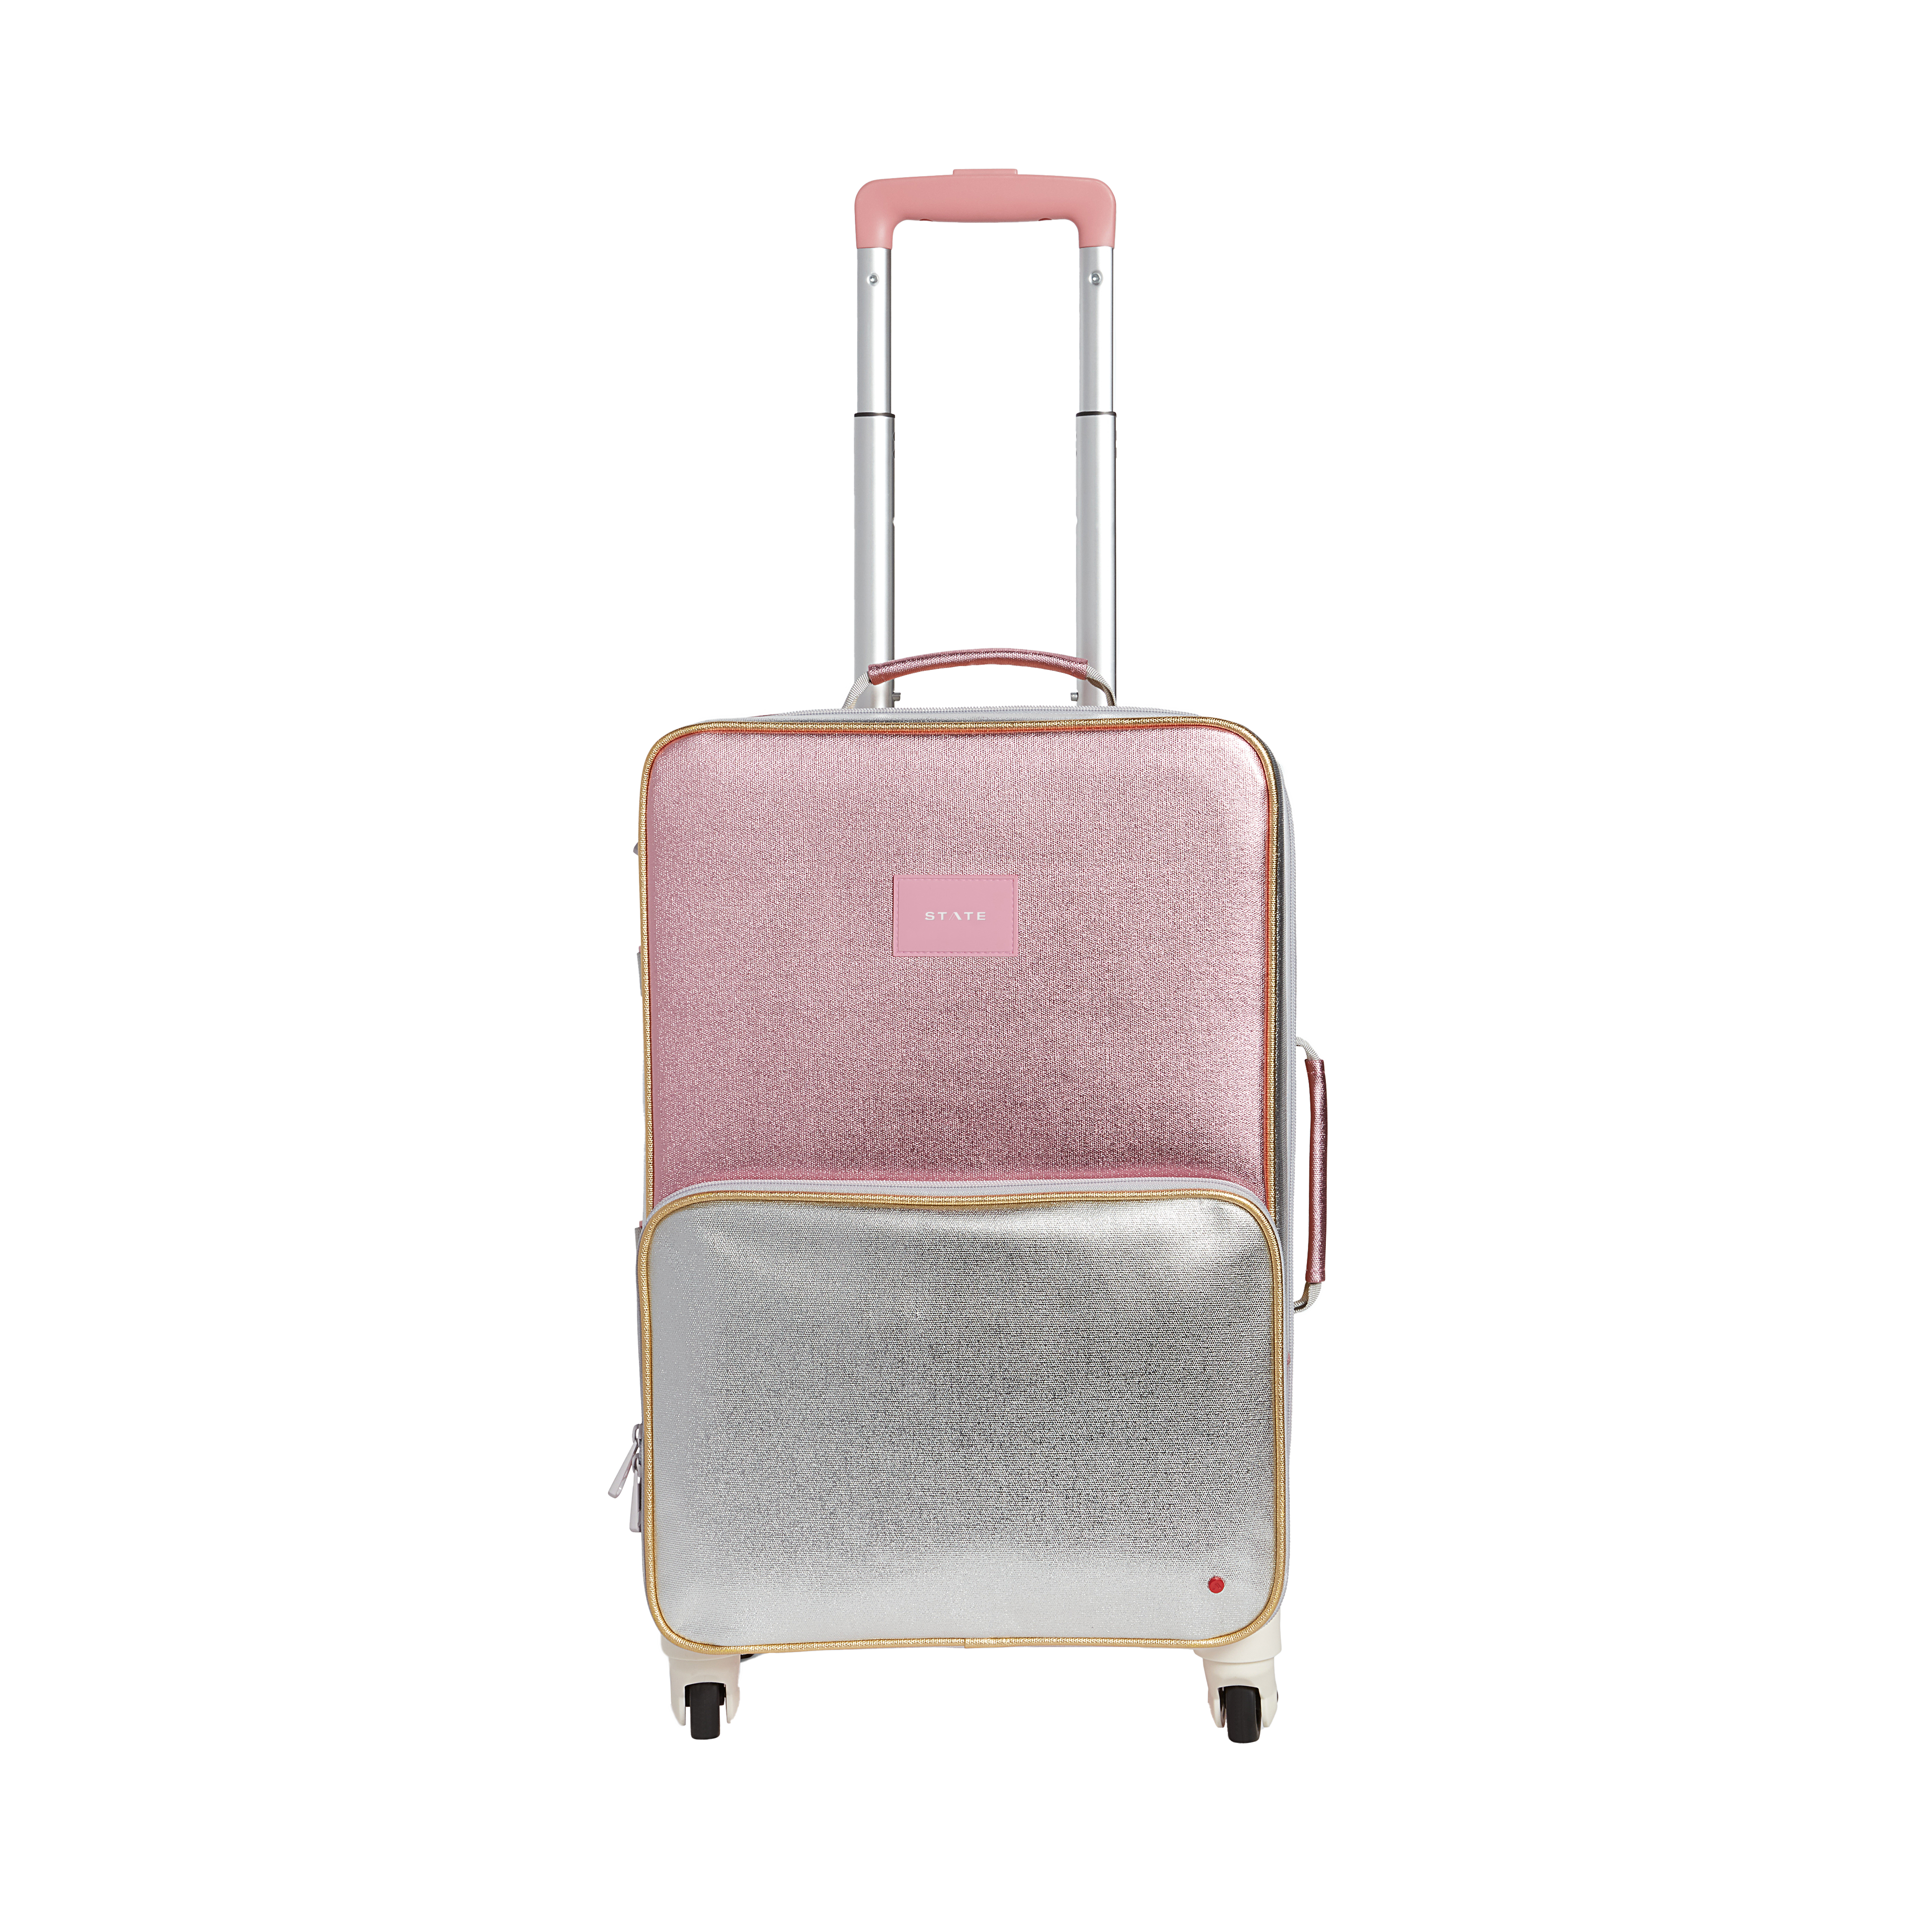  Star river Suitcase, Suitcase, Durable, Pink, Silver